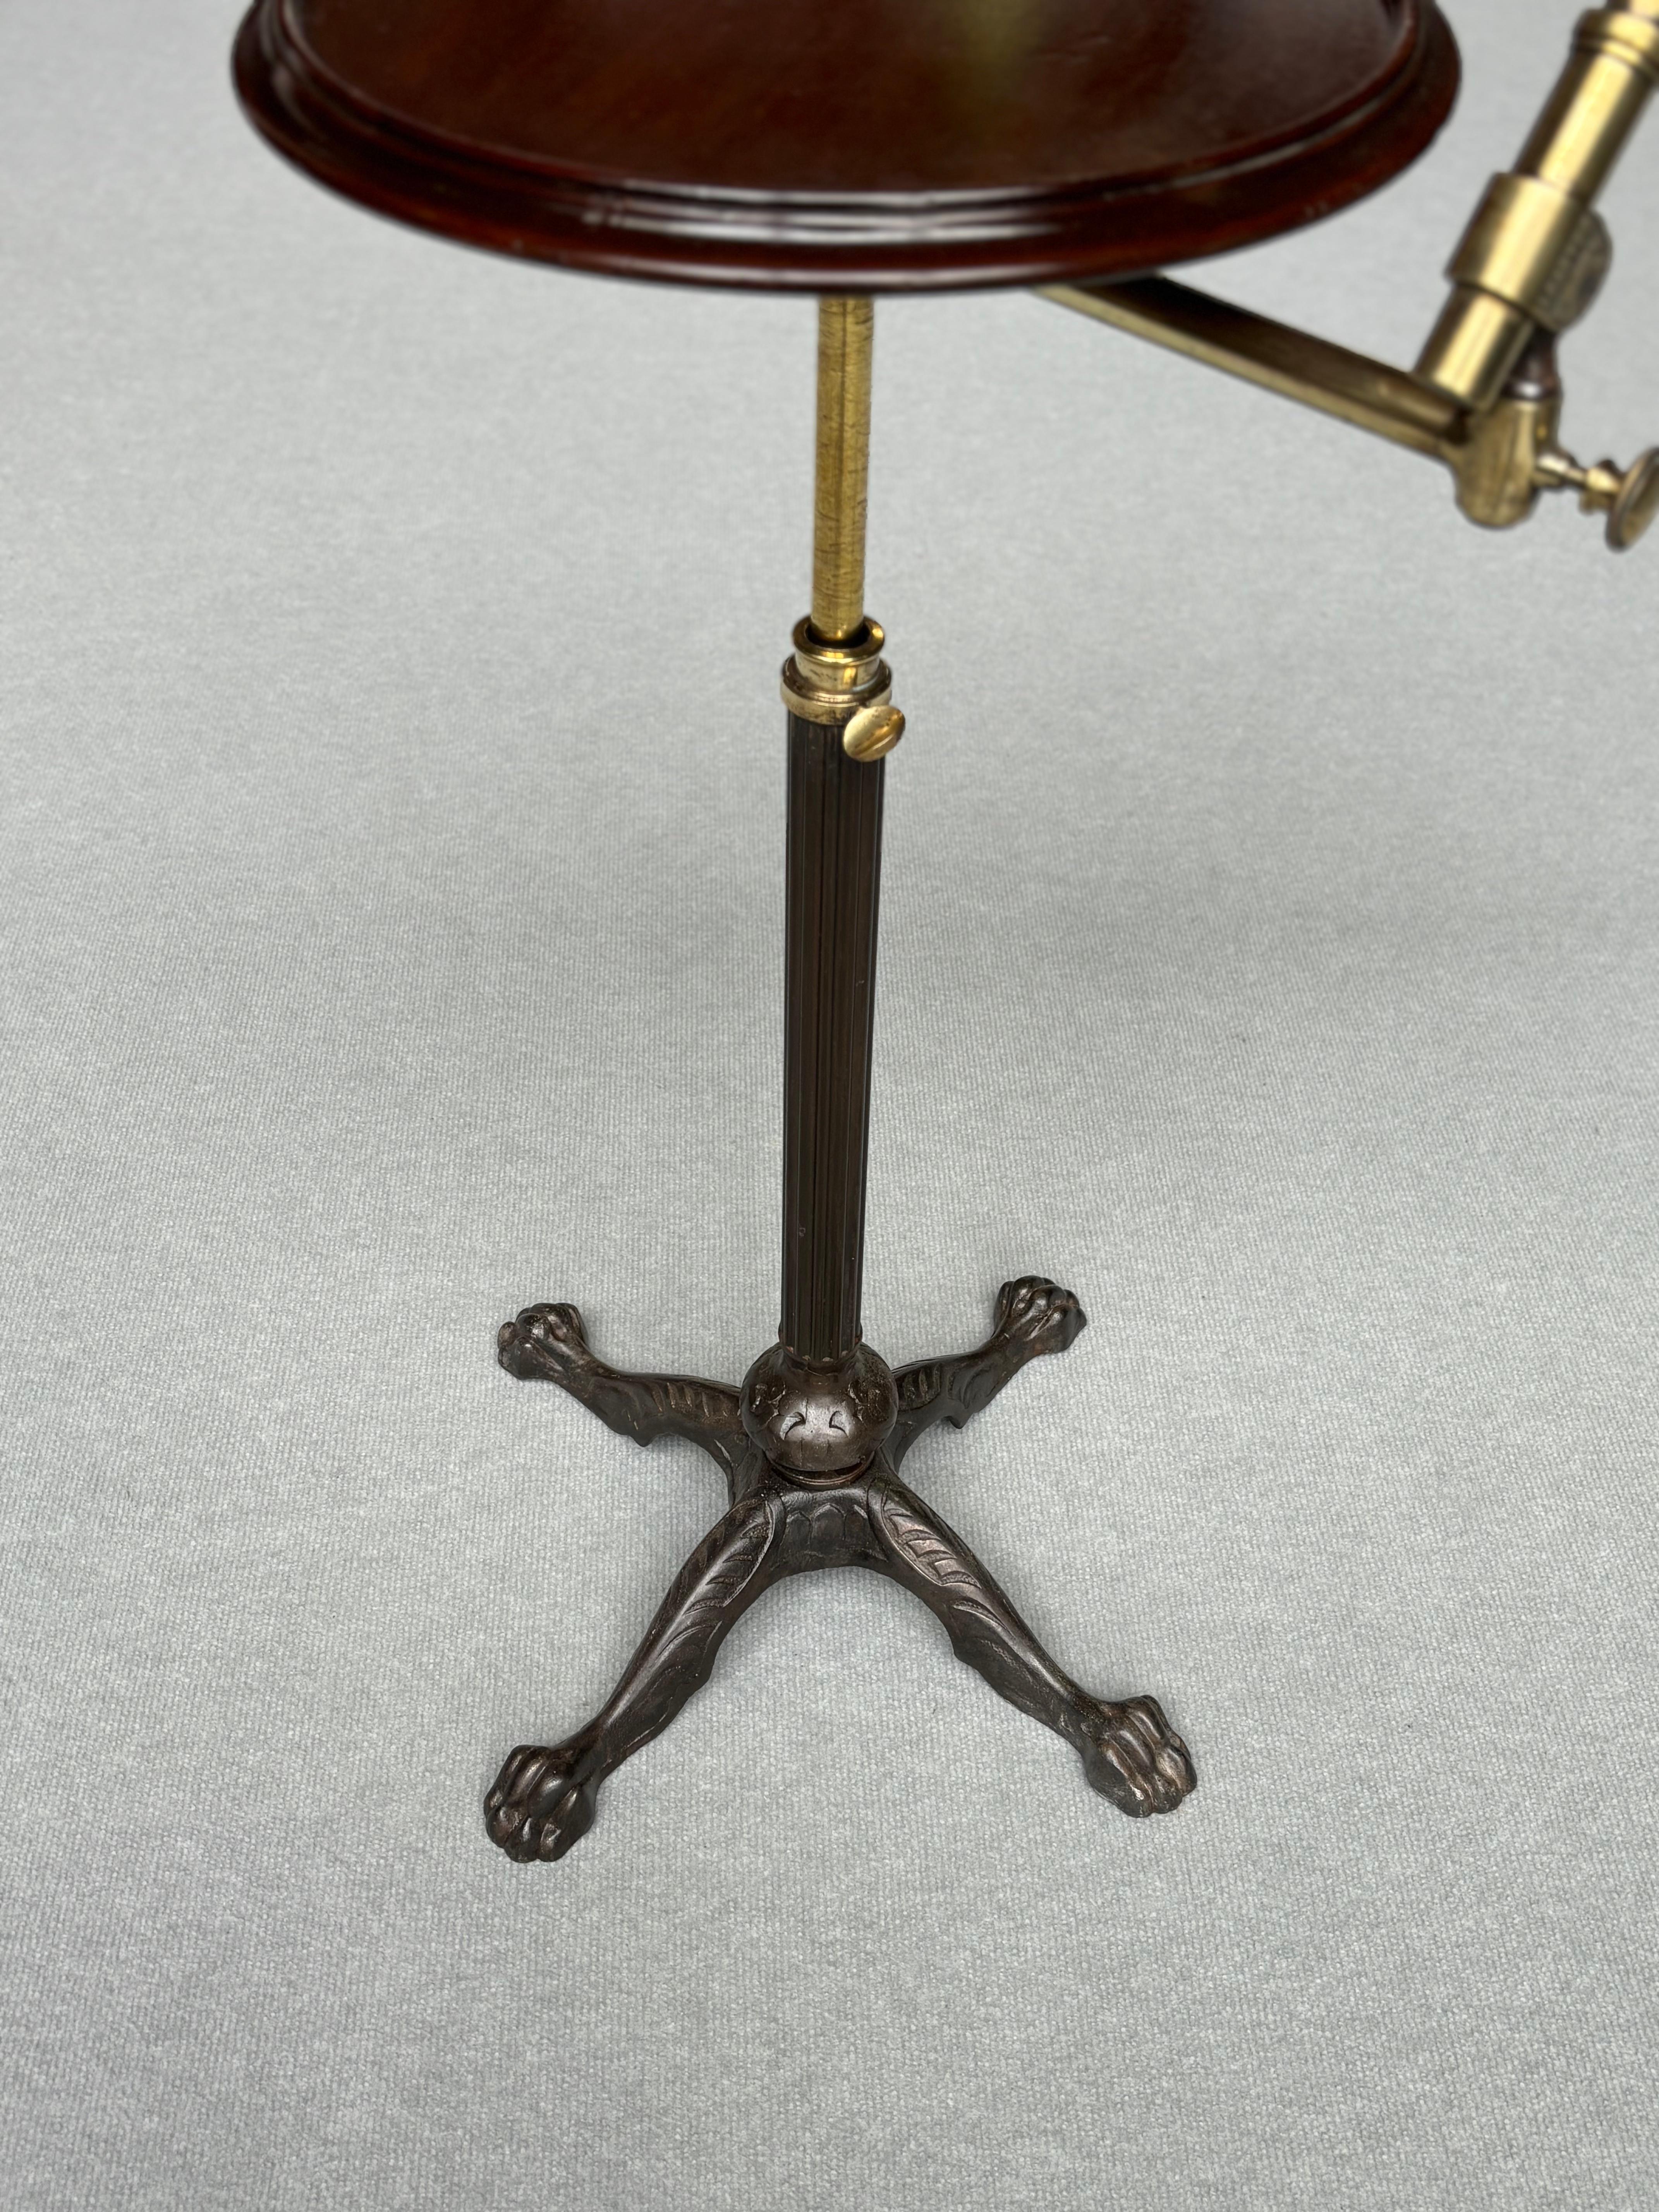 19th Century Victorian Period Cast Iron Adjustable Reading Stand by John Carter In Good Condition For Sale In Petworth,West Sussex, GB